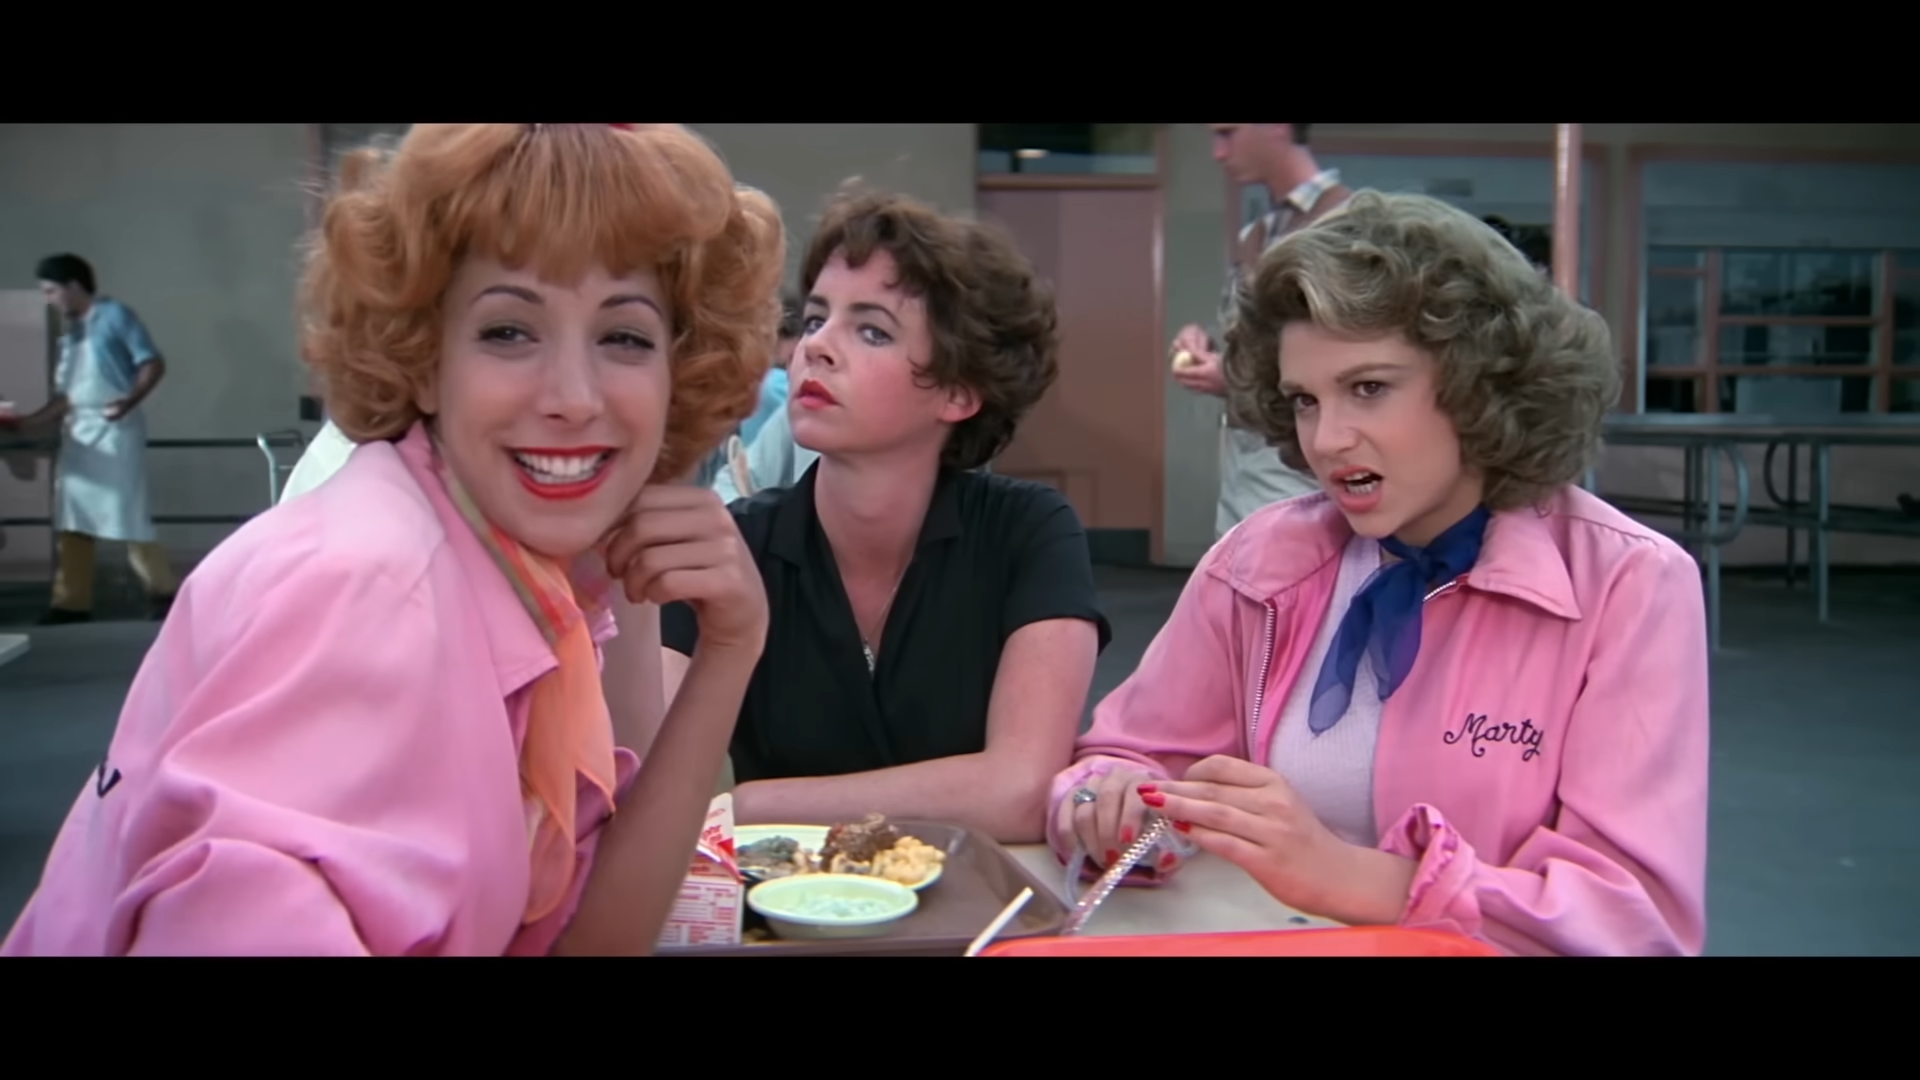 Paramount+ Announces 'Grease' Prequel 'Grease: Rise of the Pink Ladies'  Coming in 2023 - mxdwn Television